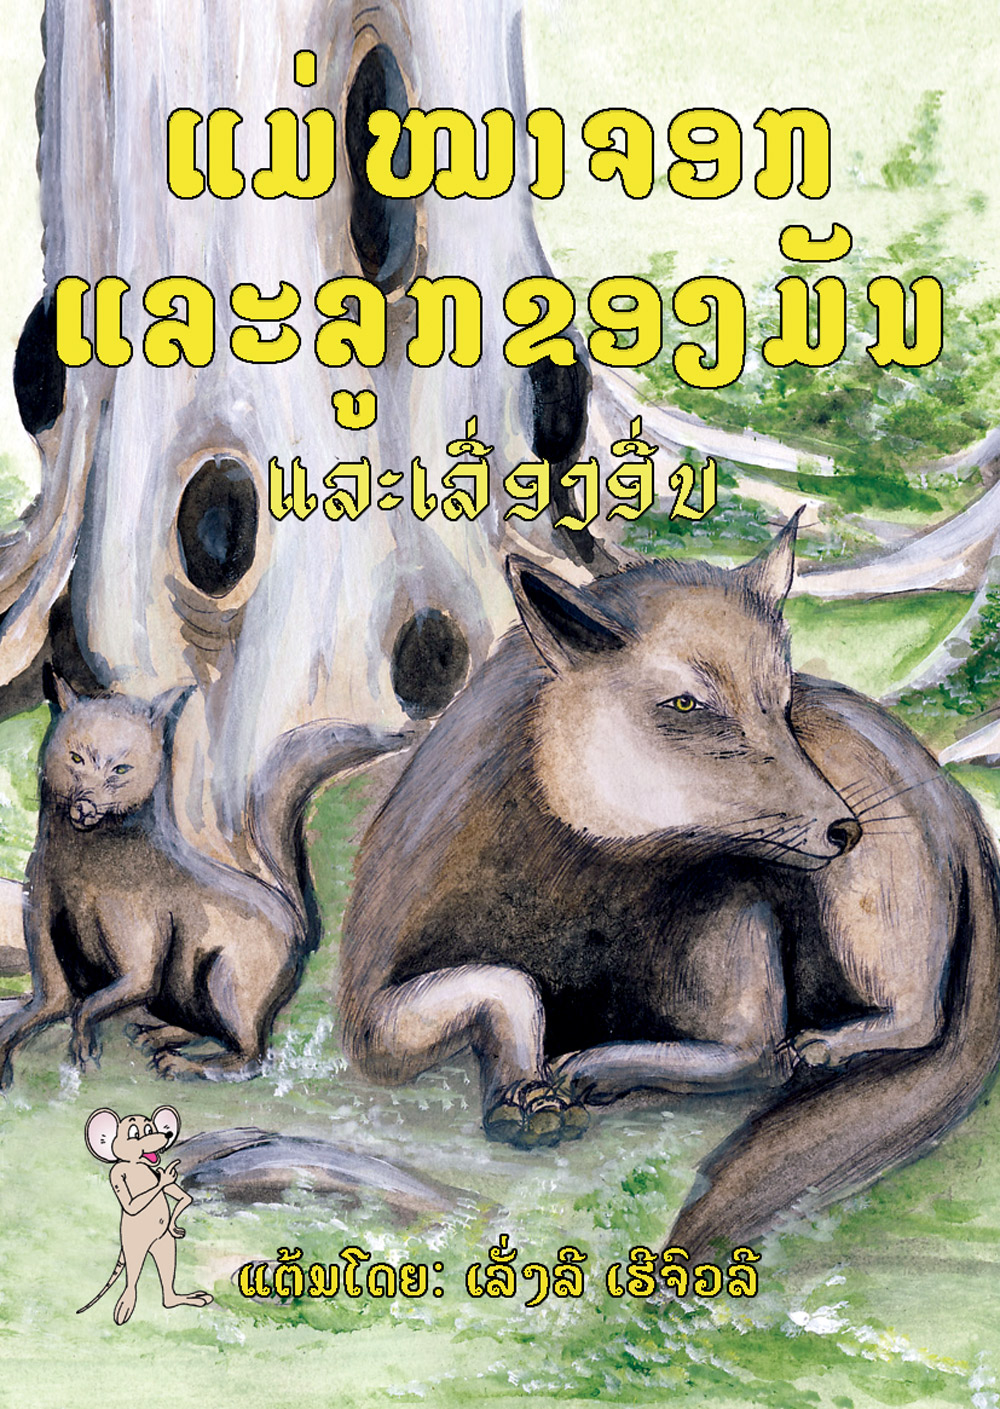 The Mother Fox and Her Puppies large book cover, published in Lao language